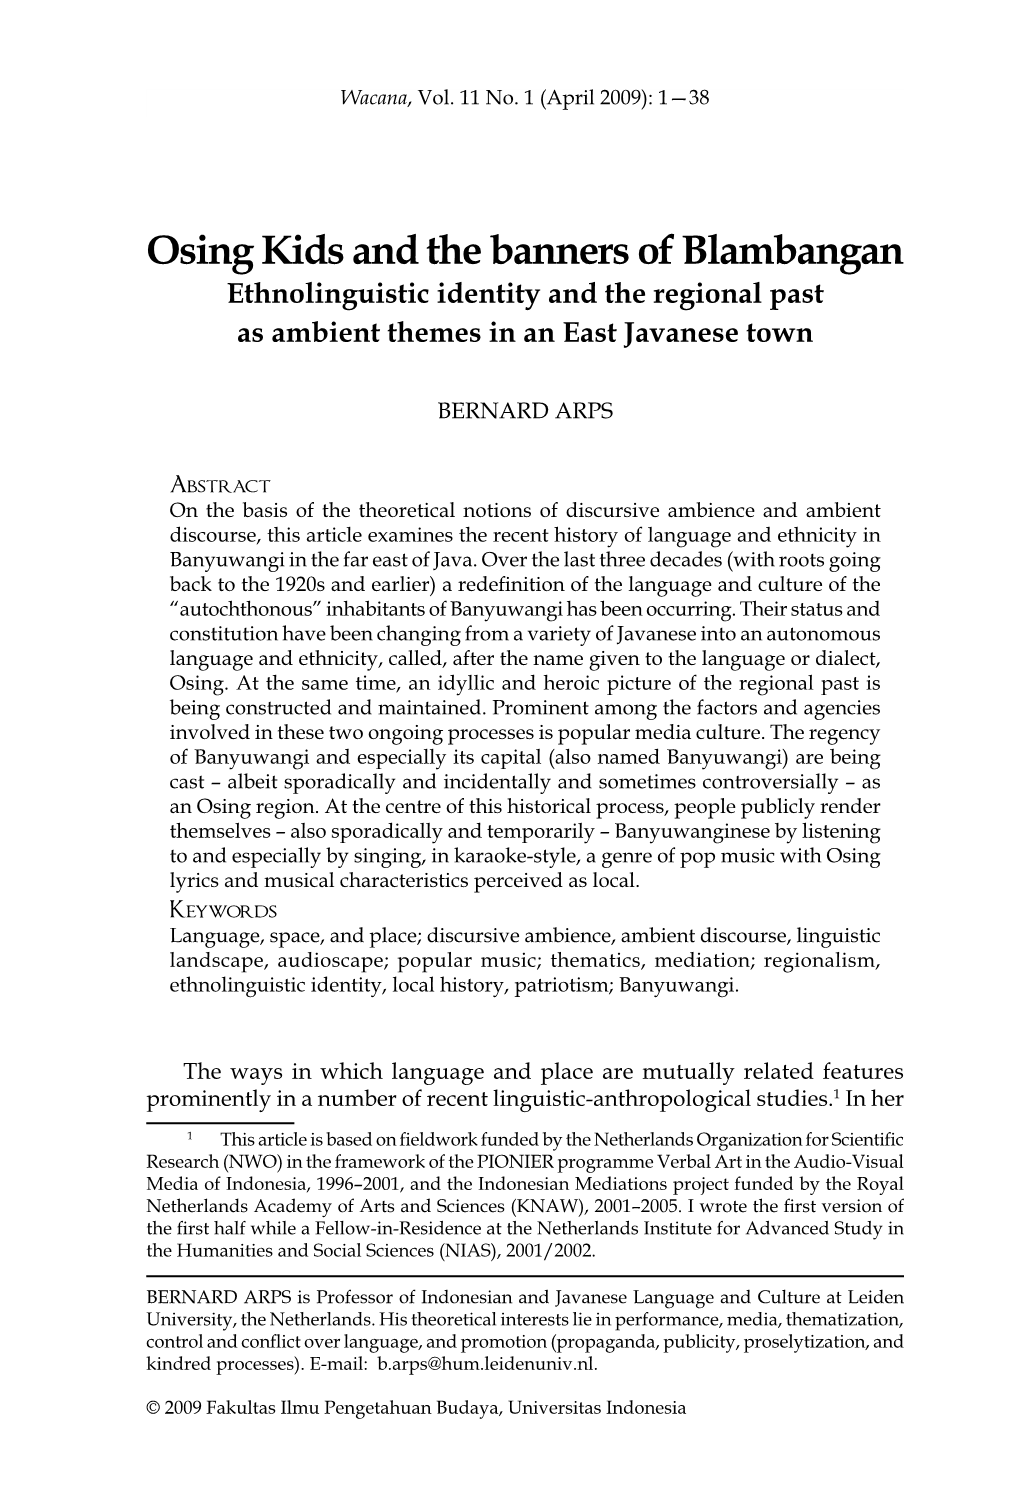 Osing Kids and the Banners of Blambangan Ethnolinguistic Identity and the Regional Past As Ambient Themes in an East Javanese Town